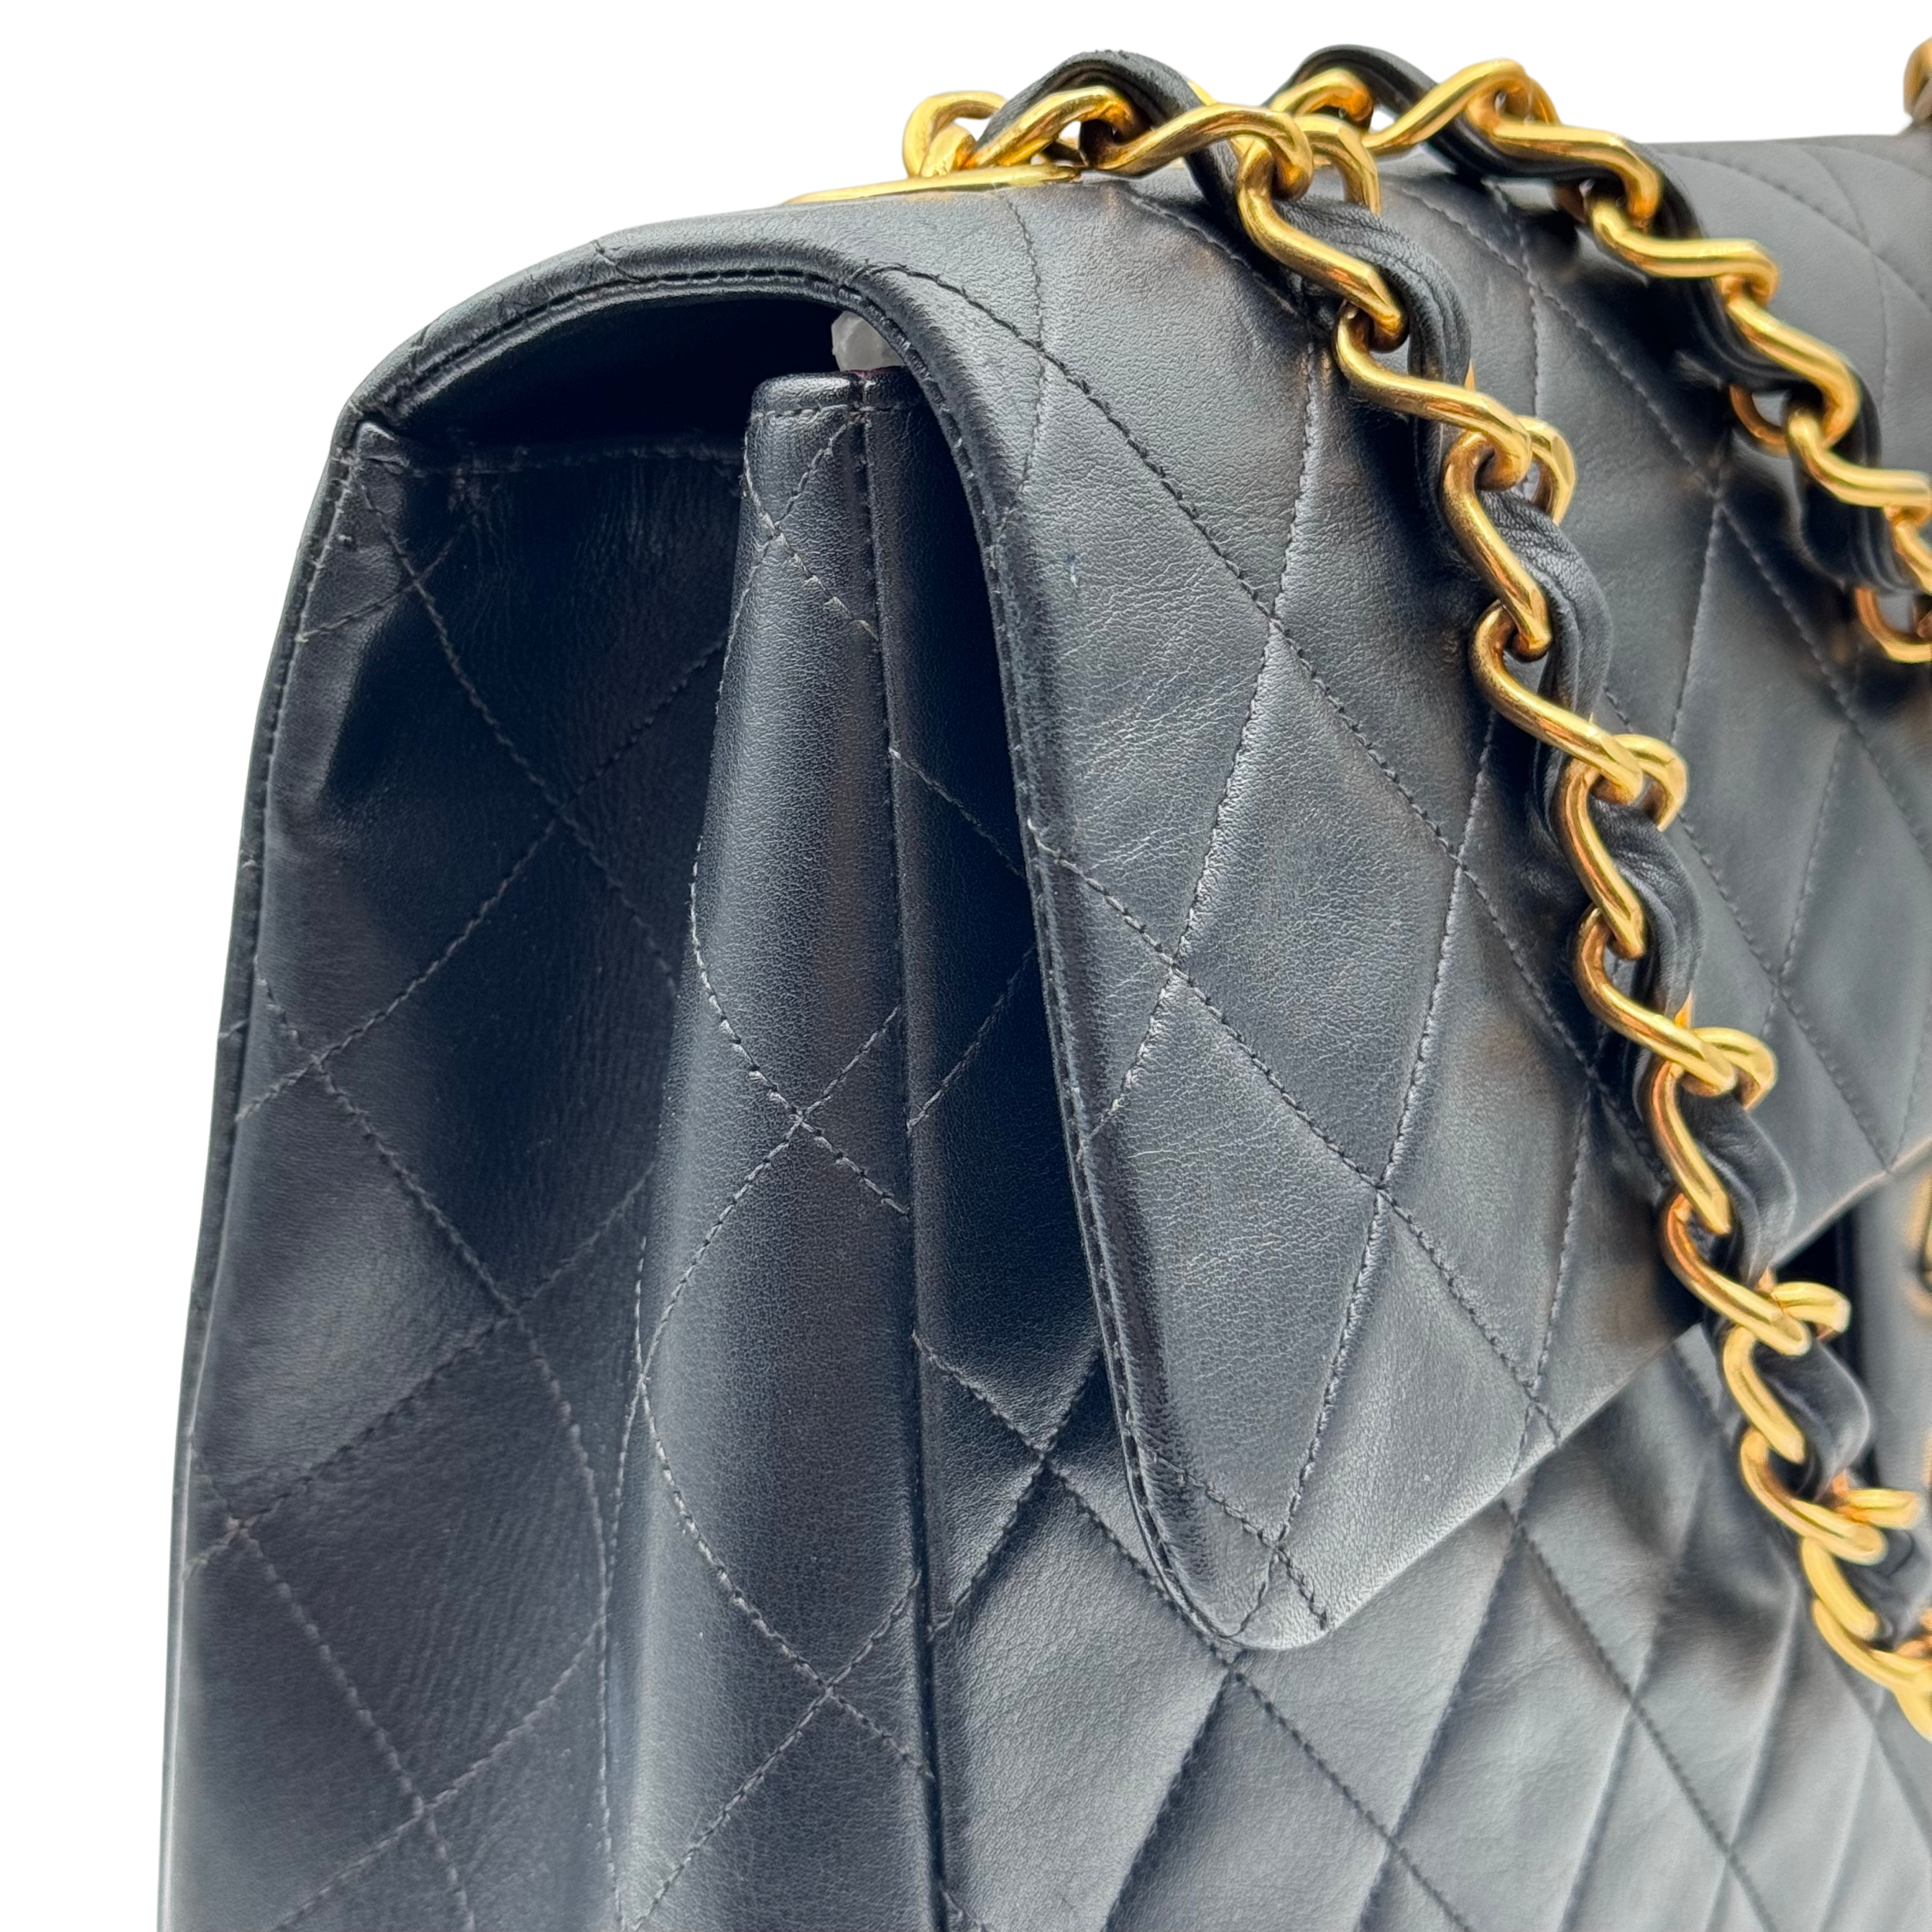 CLASSIC TIMELESS MAXI - CHANEL Lola Collective